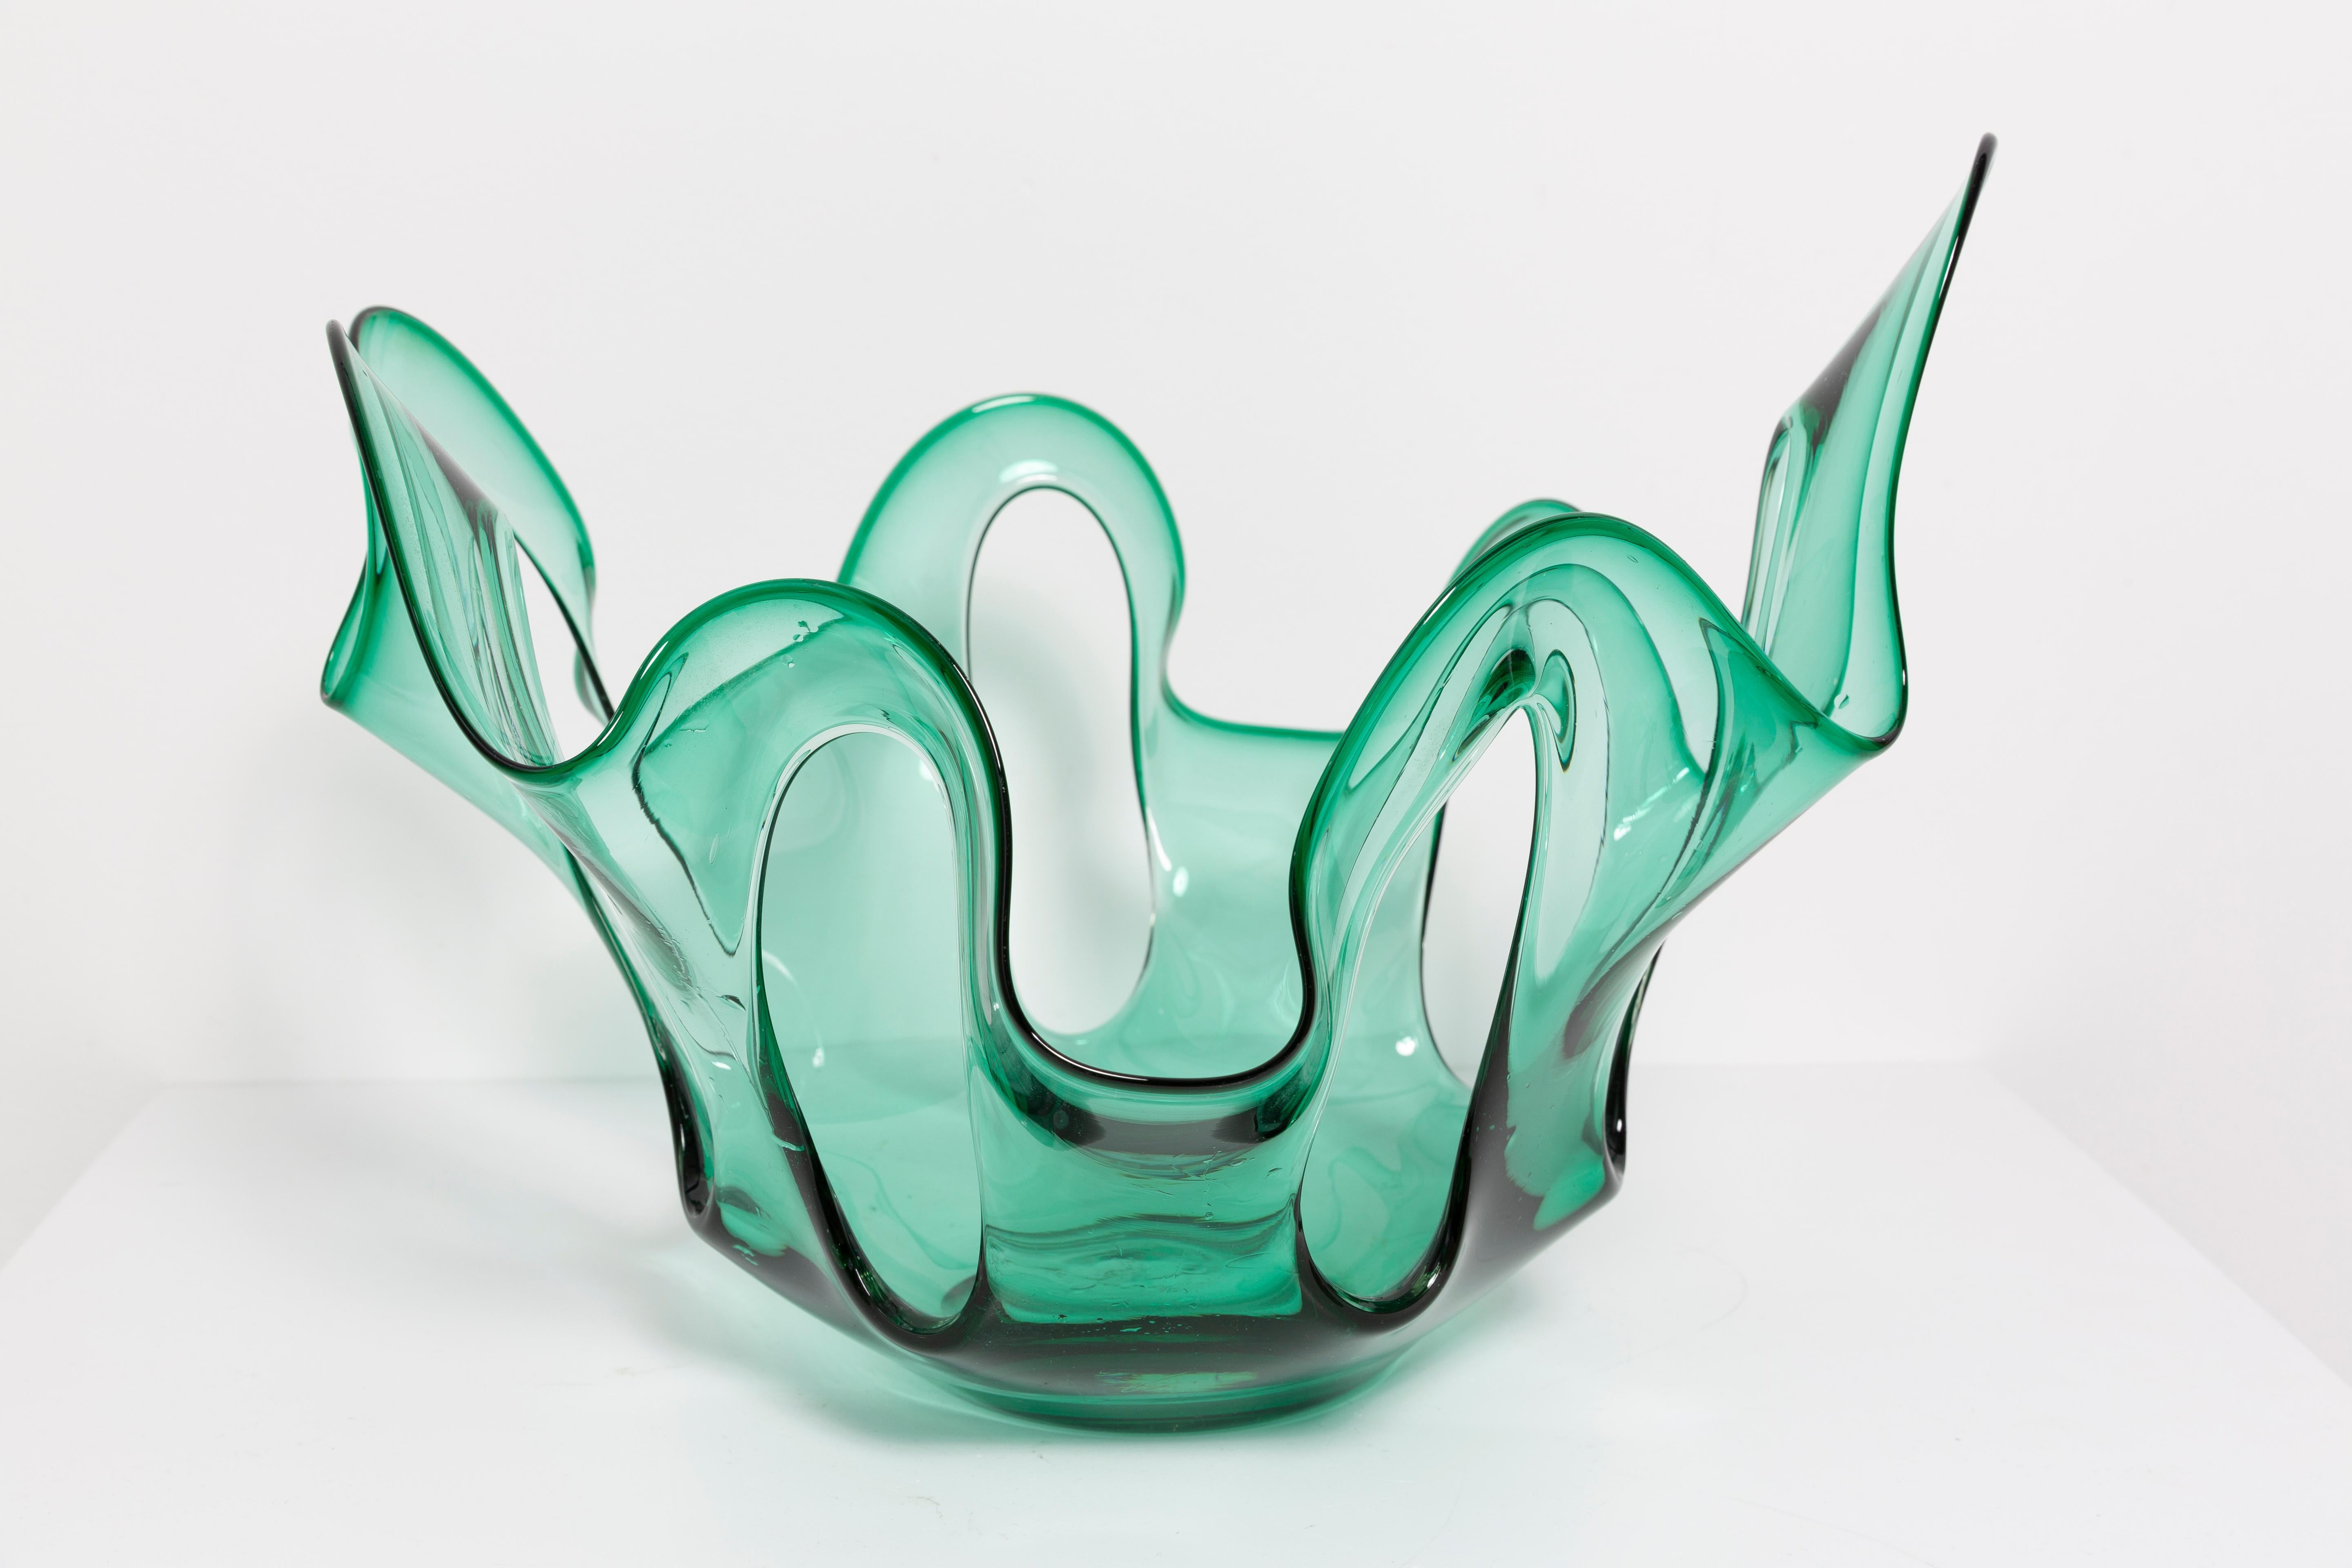 Green in amazing organic shape. Produced in 1960s.
Glass in perfect condition. The vase looks like it has just been taken out of the box.

No jags, defects etc. The outer relief surface, the inner smooth. Thick glass vase, massive.

The